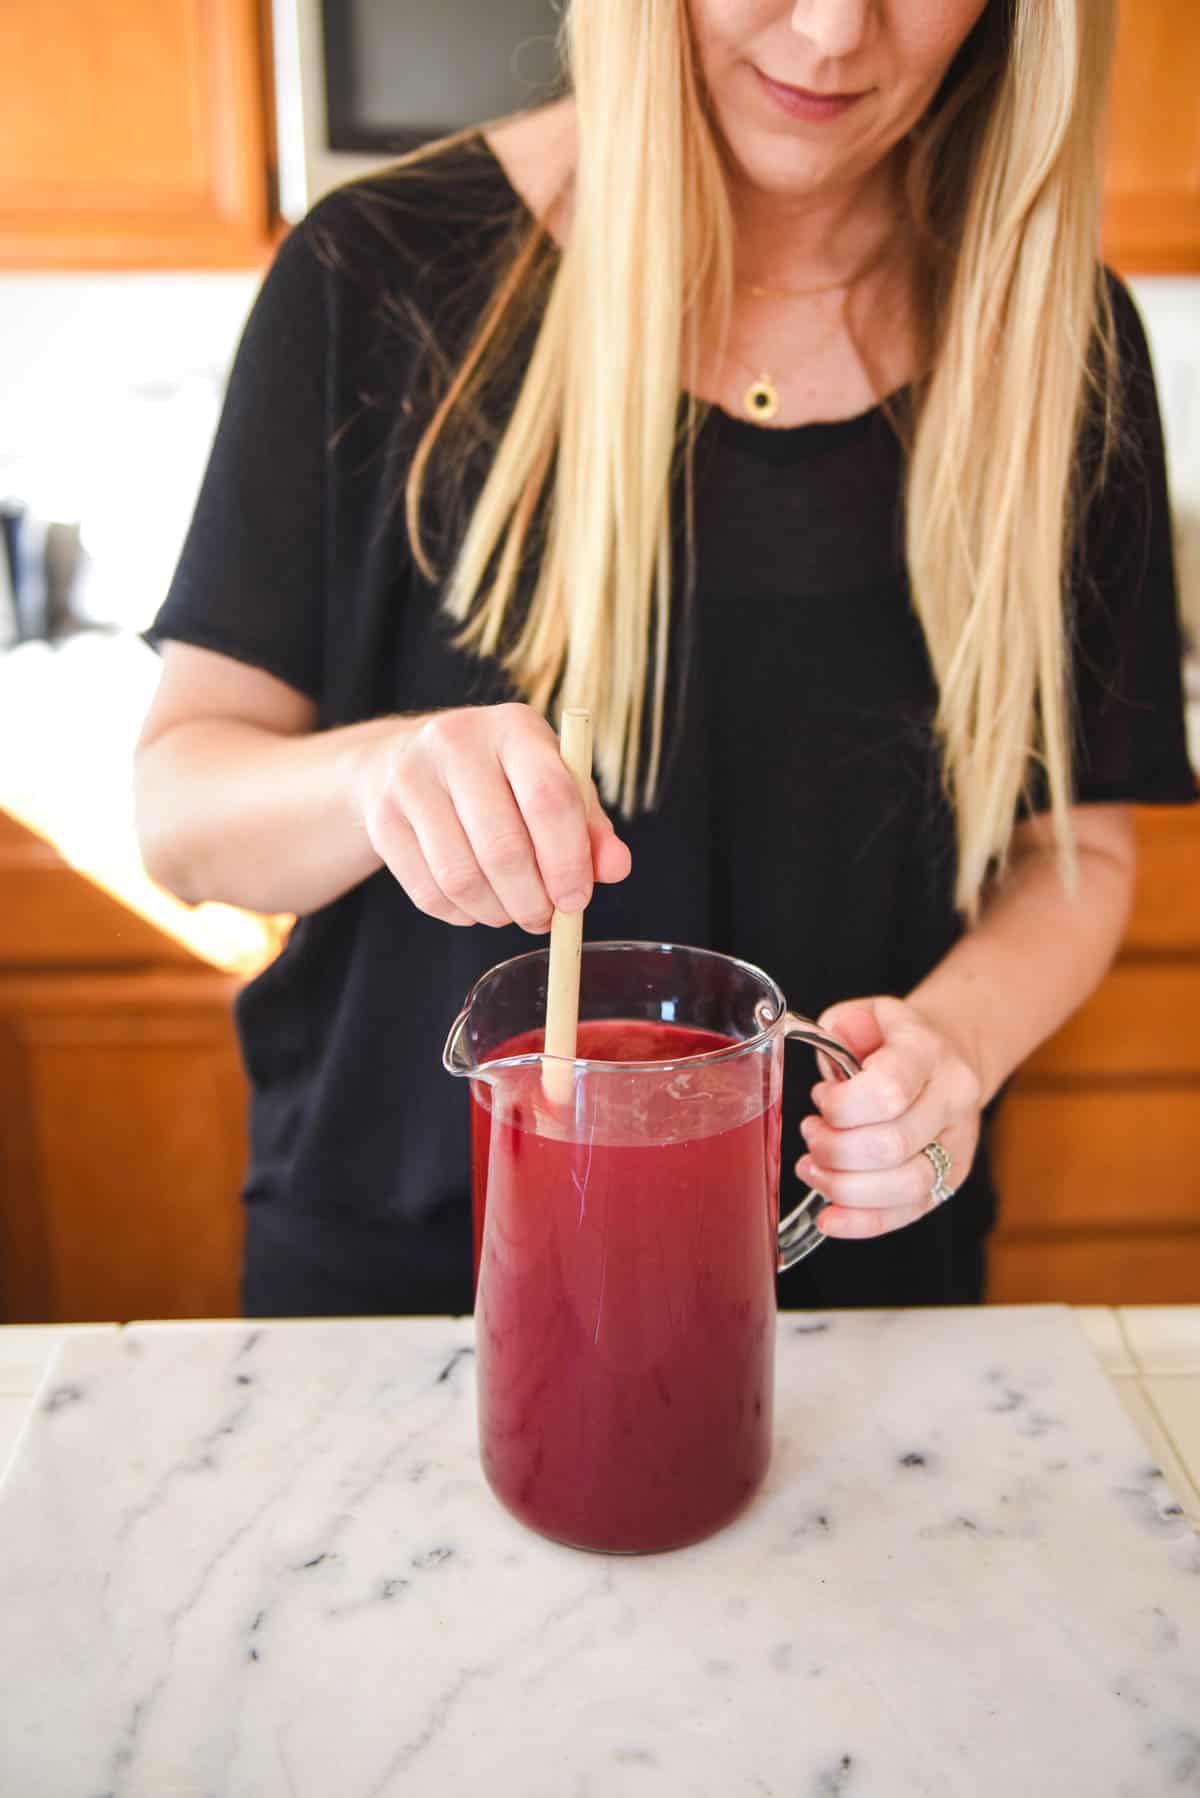 Woman stirring blueberry lemonade in a pitcher.